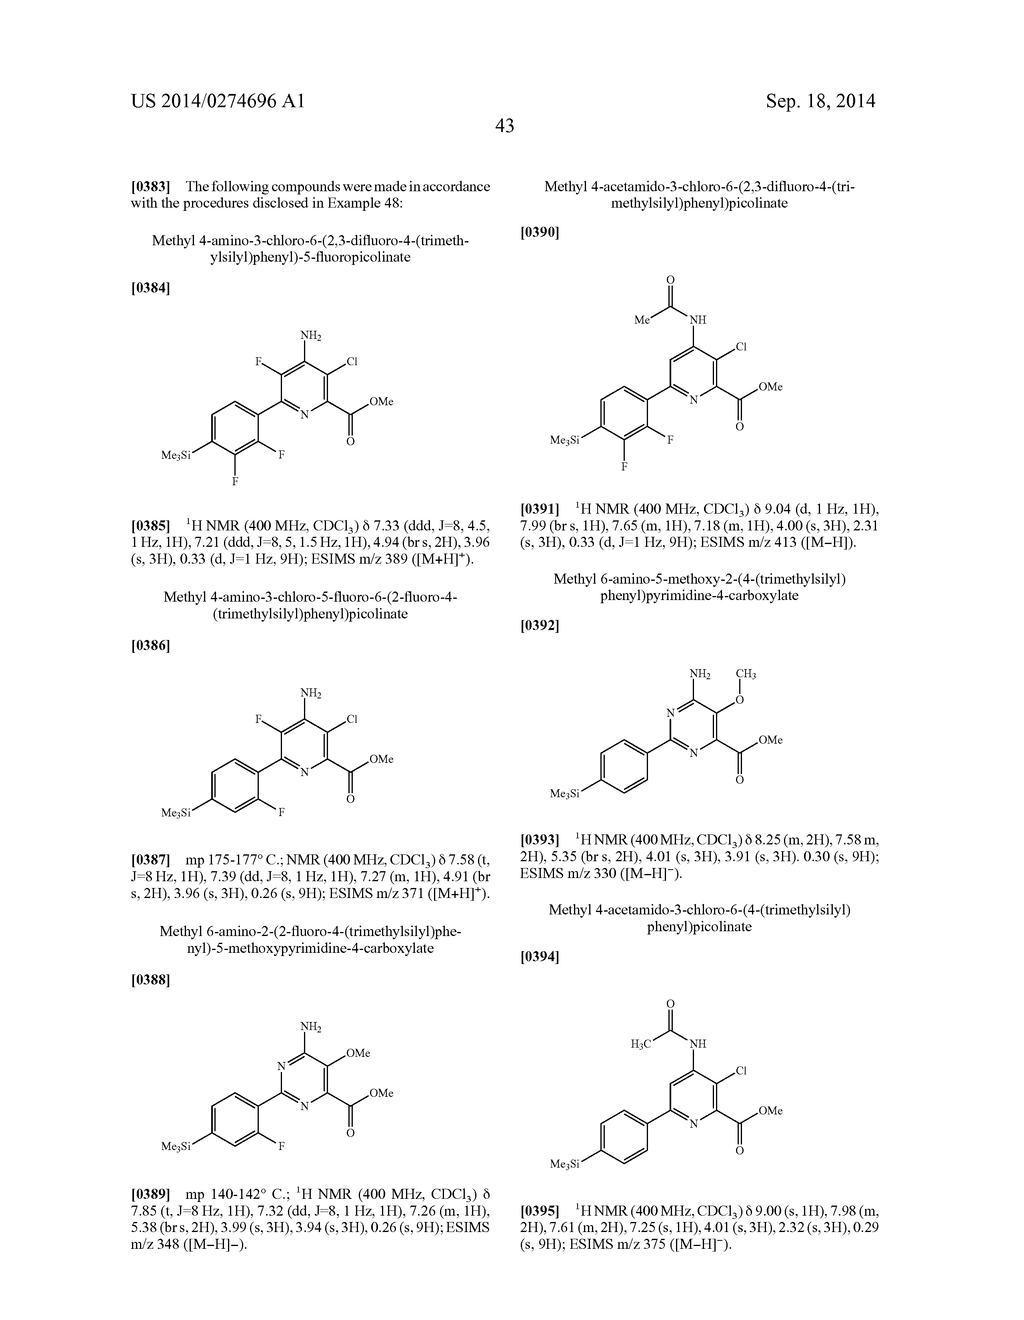 4-AMINO-6-(4-SUBSTITUTED-PHENYL)-PICOLINATES AND     6-AMINO-2-(4-SUBSTITUTED-PHENYL)-PYRIMIDINE-4-CARBOXYLATES AND THEIR USE     AS HERBICIDES - diagram, schematic, and image 44